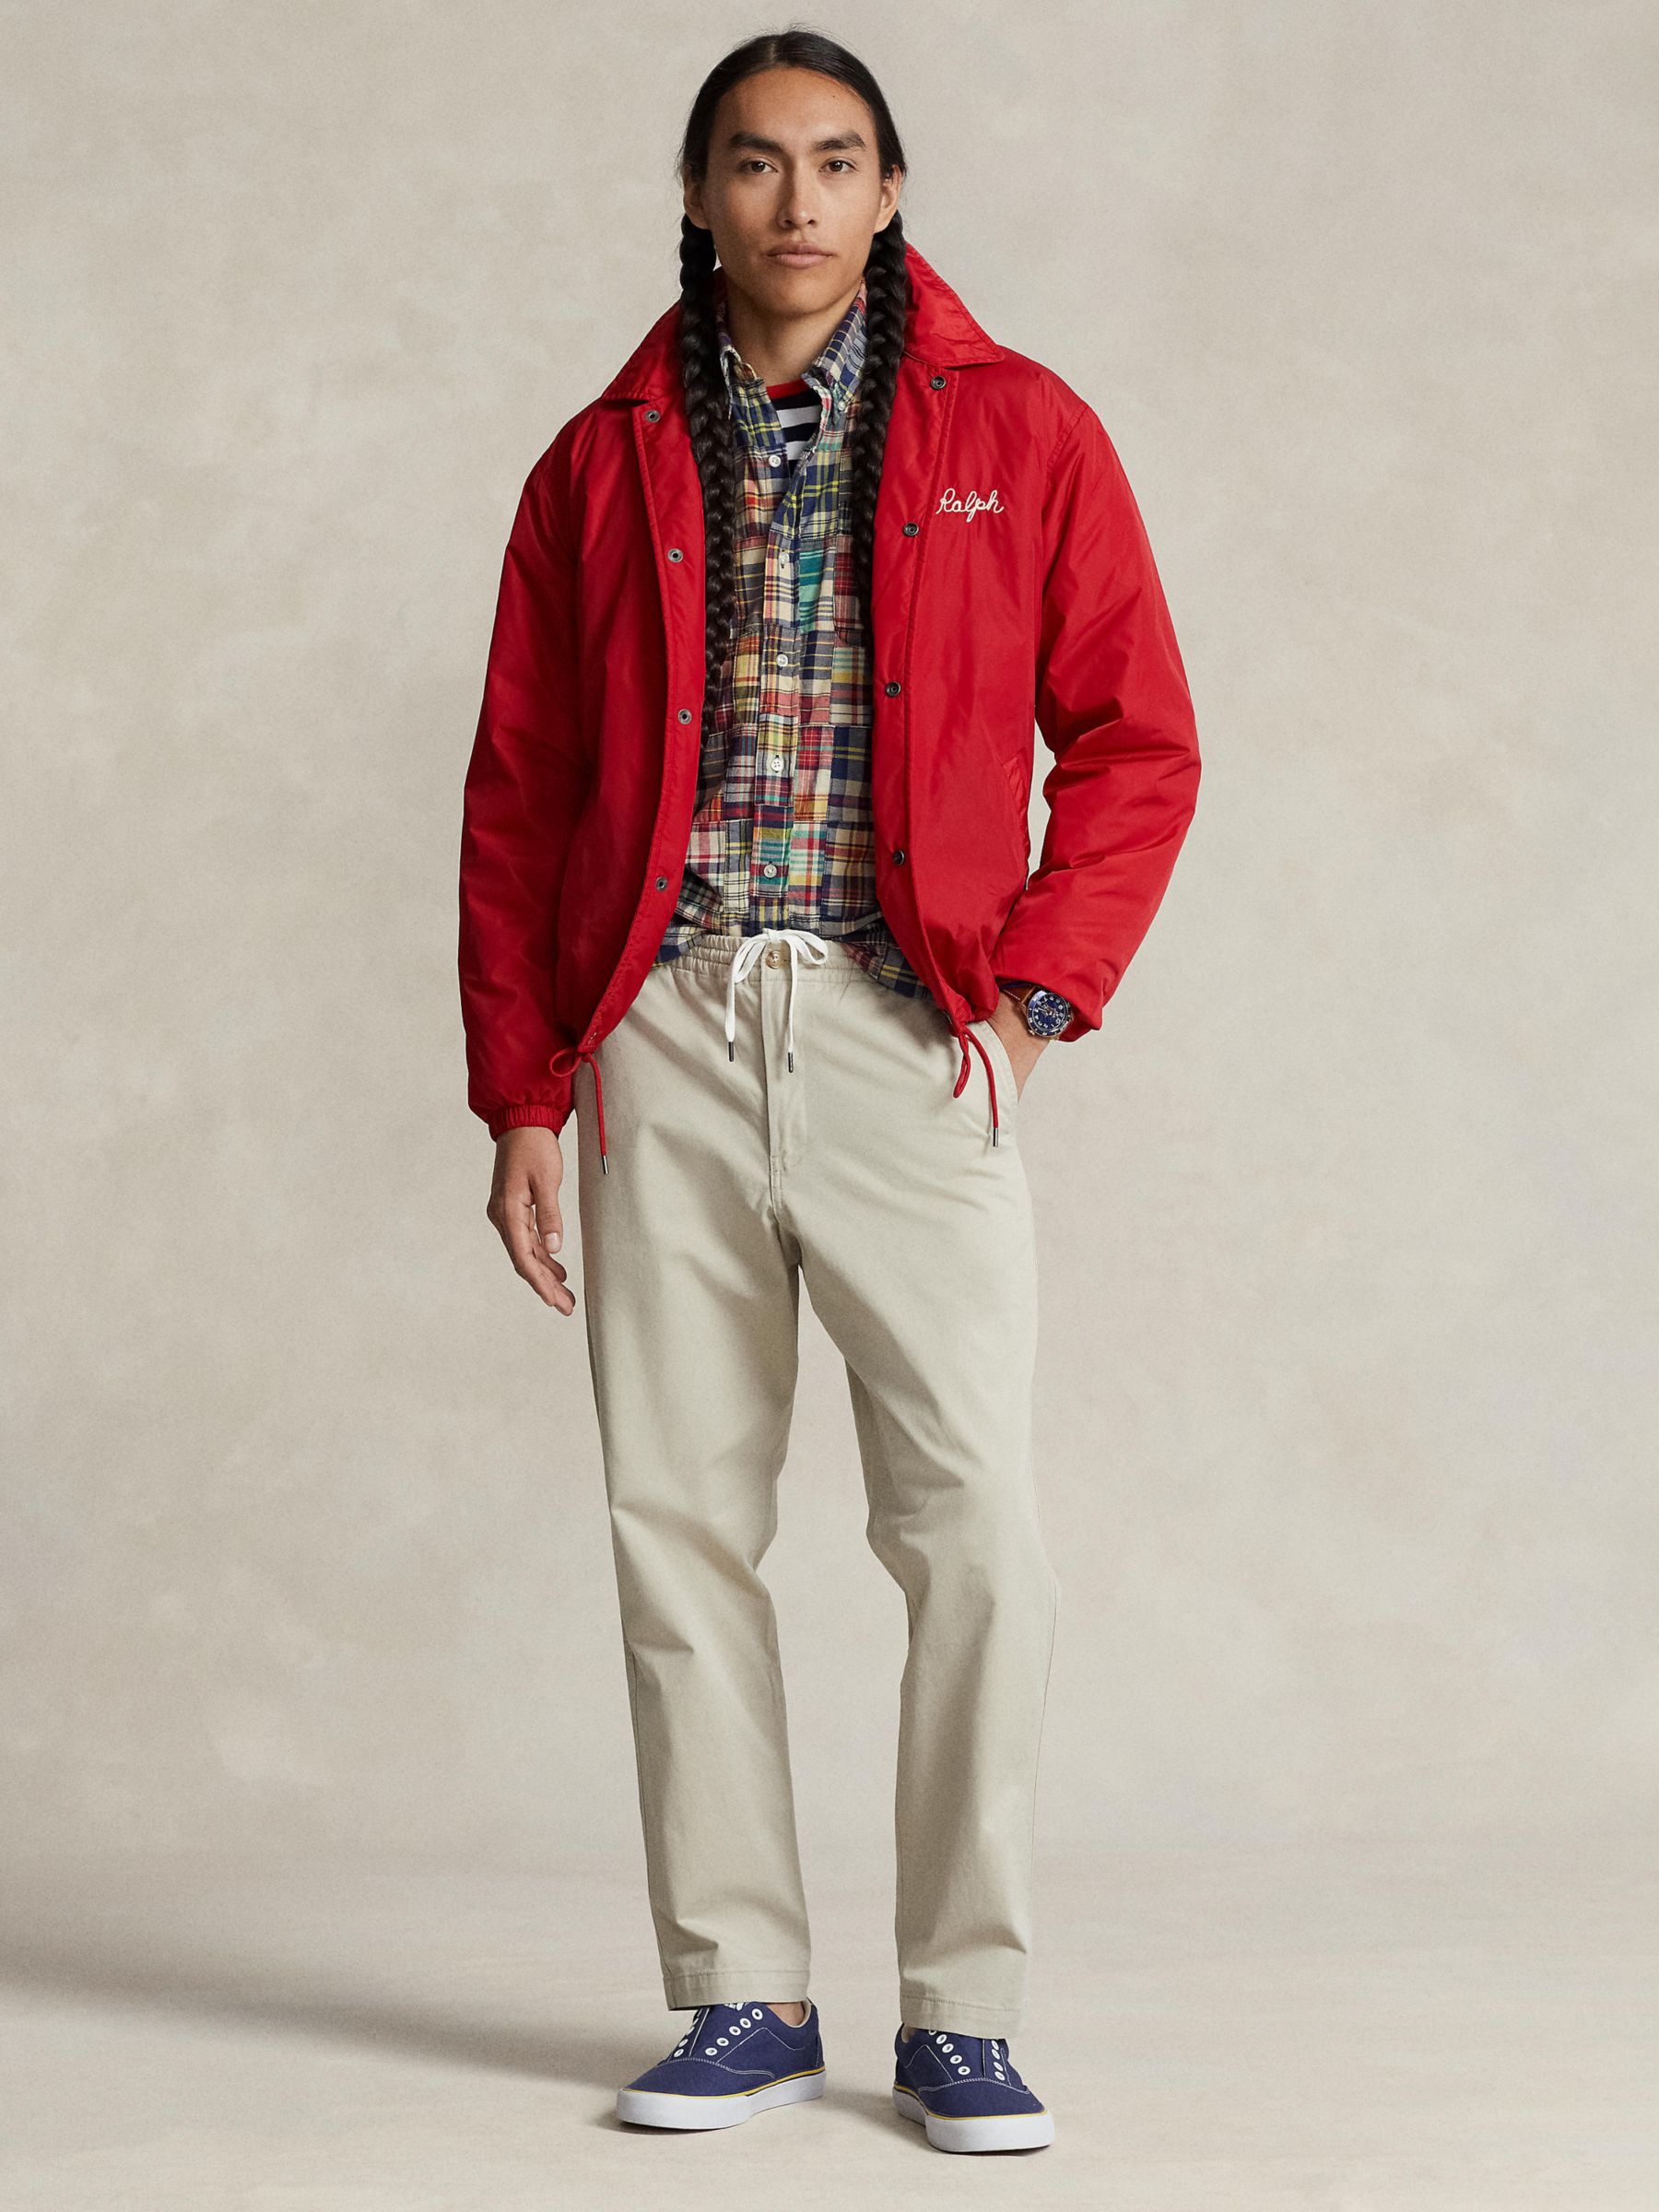 Buy Polo Ralph Lauren Prepster Classic Fit Chino Trousers Online at johnlewis.com